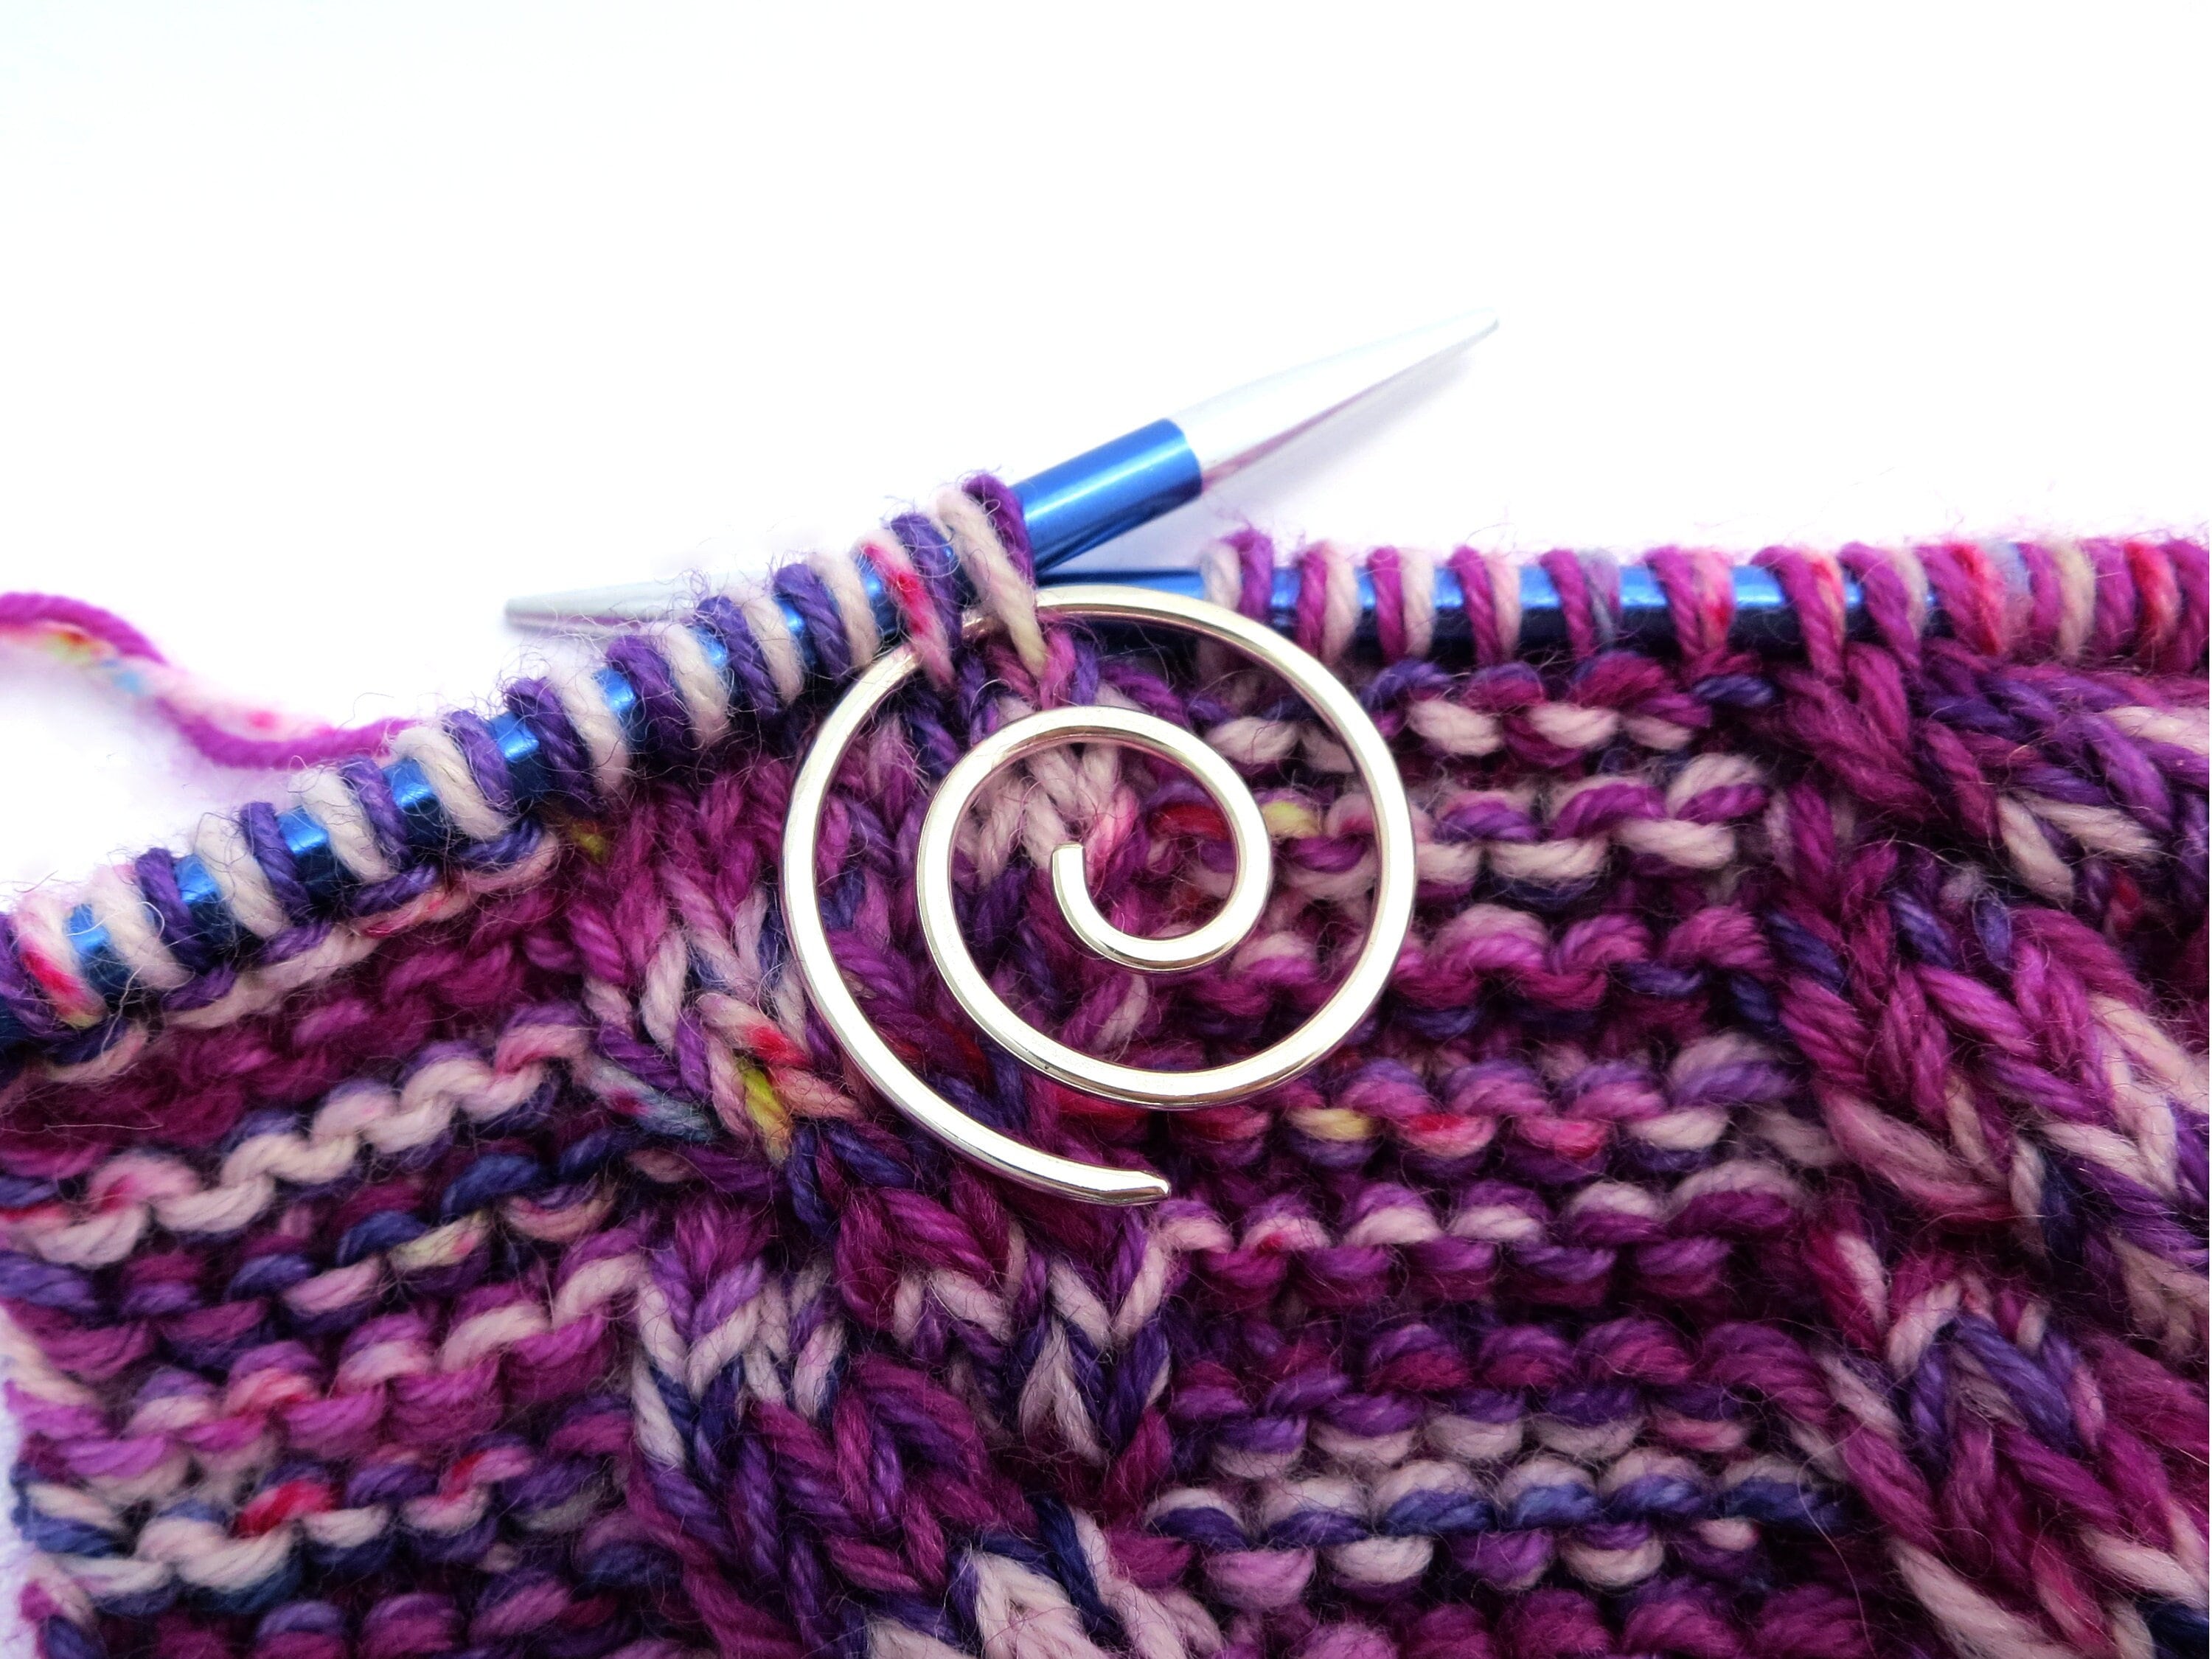 Double Yarn Guide Ring - Silver Crochet / Knitting Tension Ring